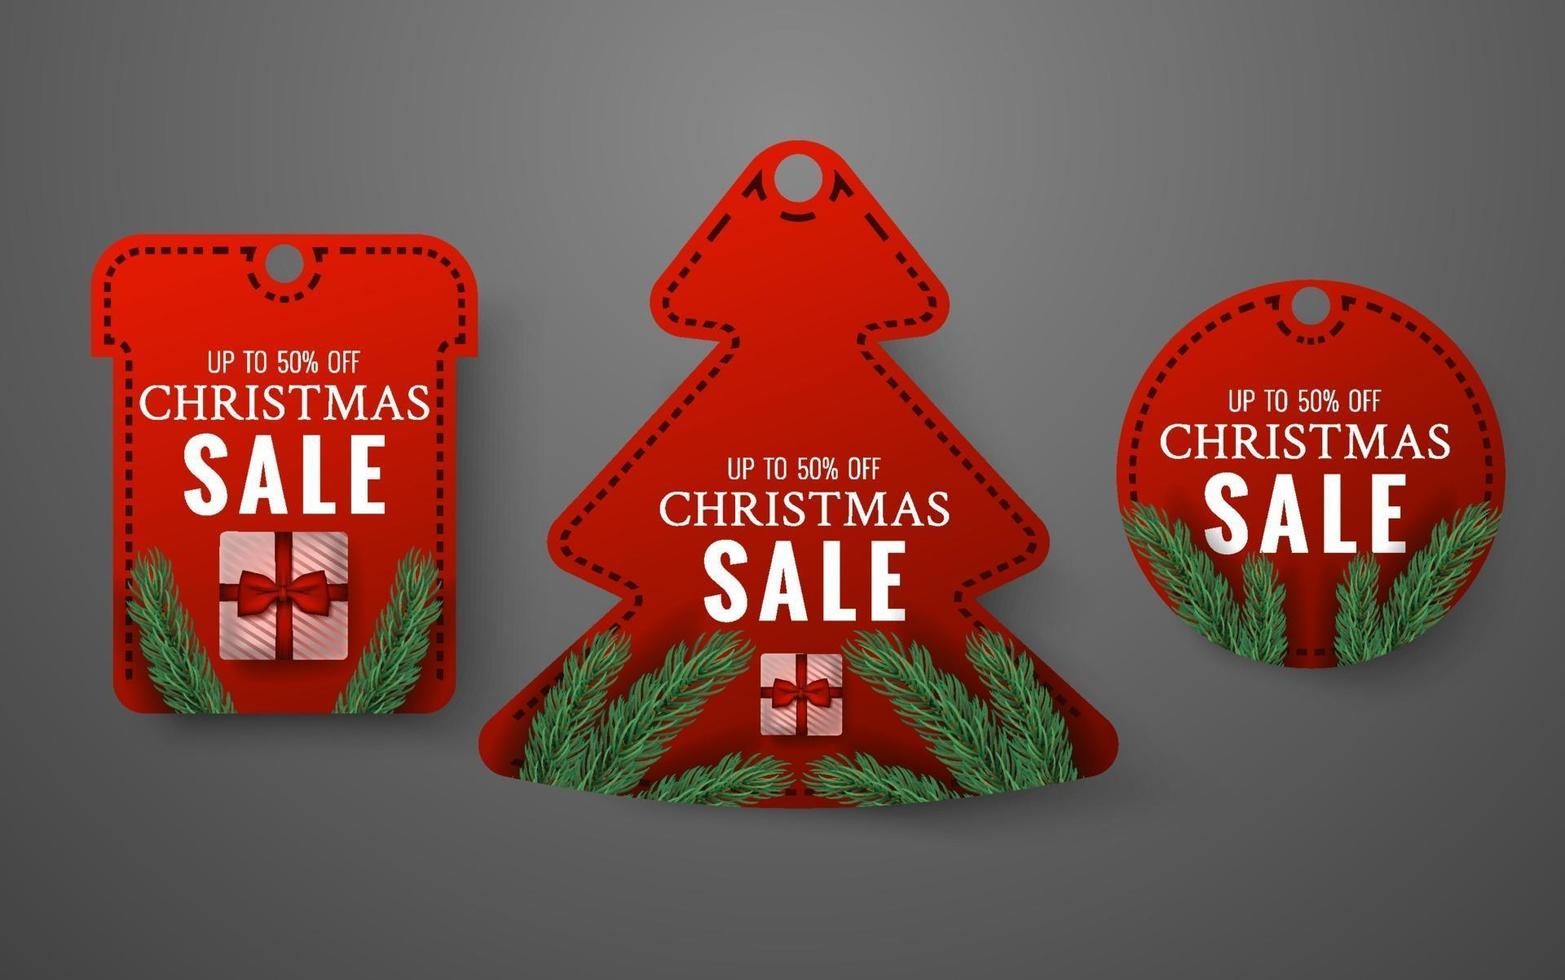 Christmas emblem with price stickers vector